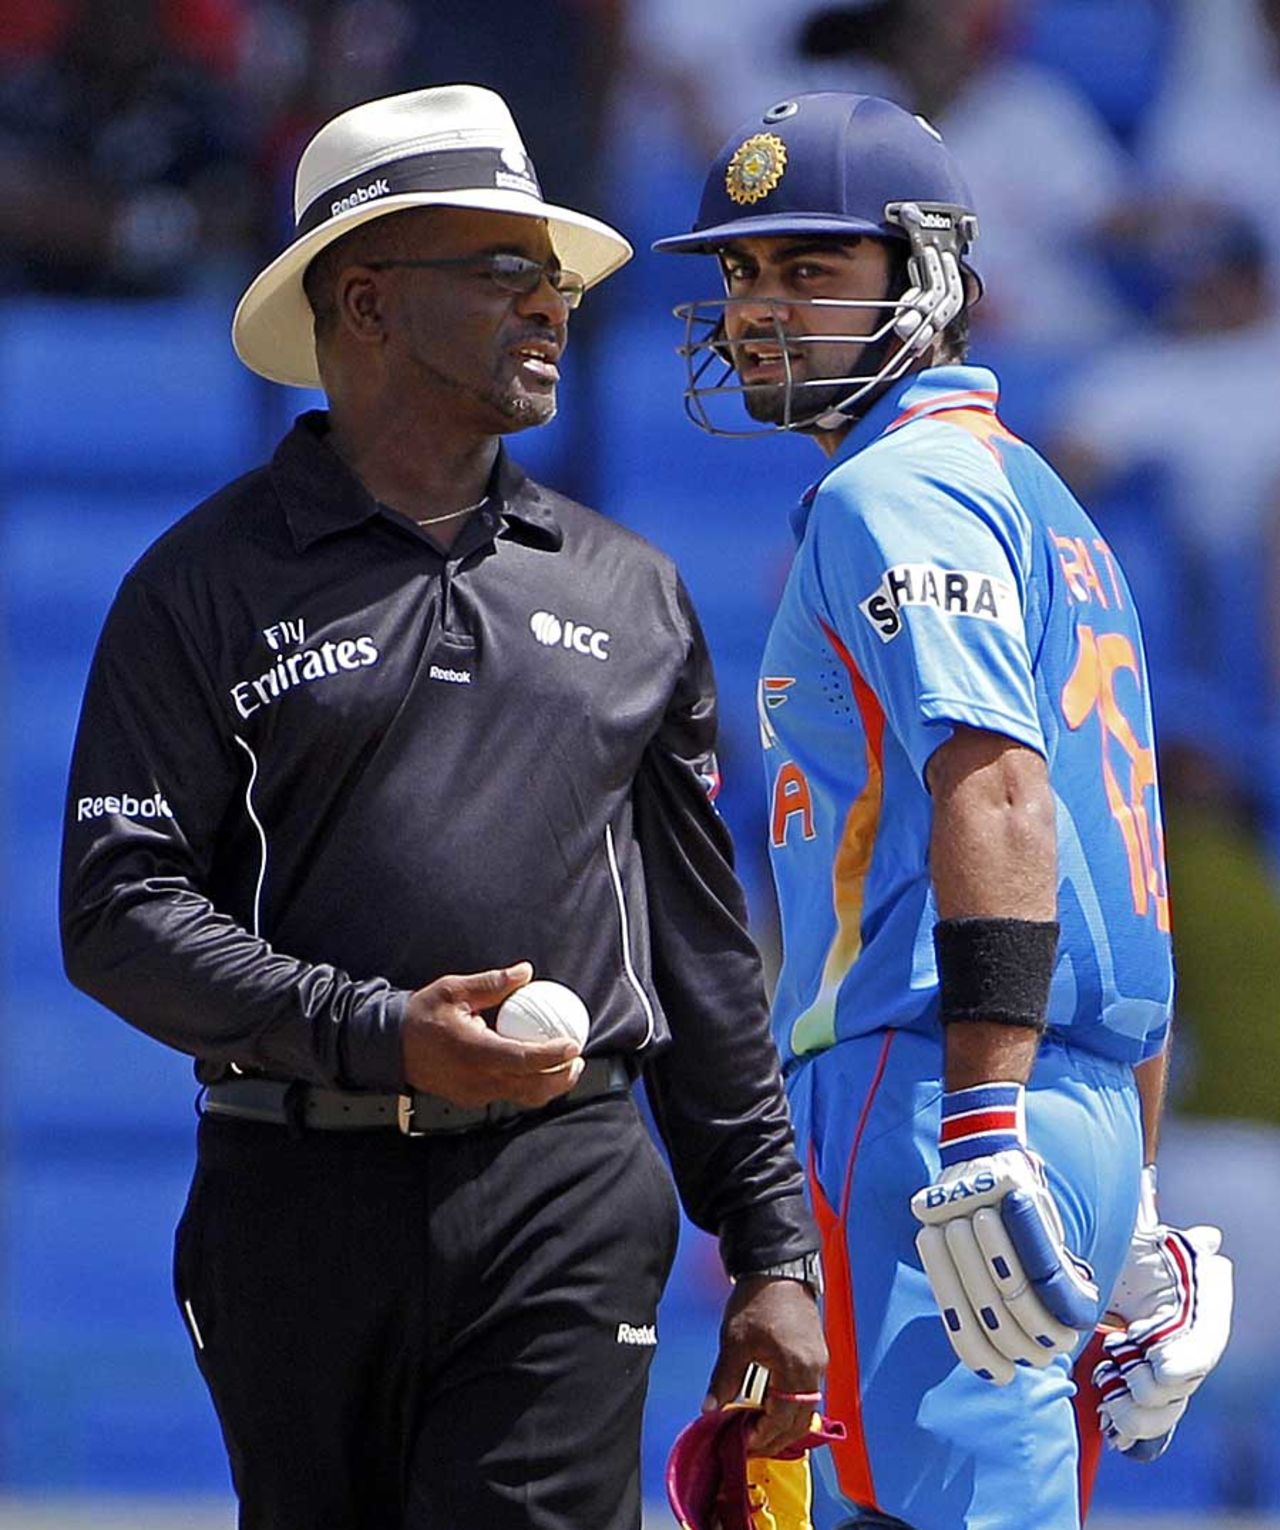 Virat Kohli has a word with umpire Normal Malcolm after he was given out lbw first ball, West Indies v India, 3rd ODI, Antigua, June 11, 2011